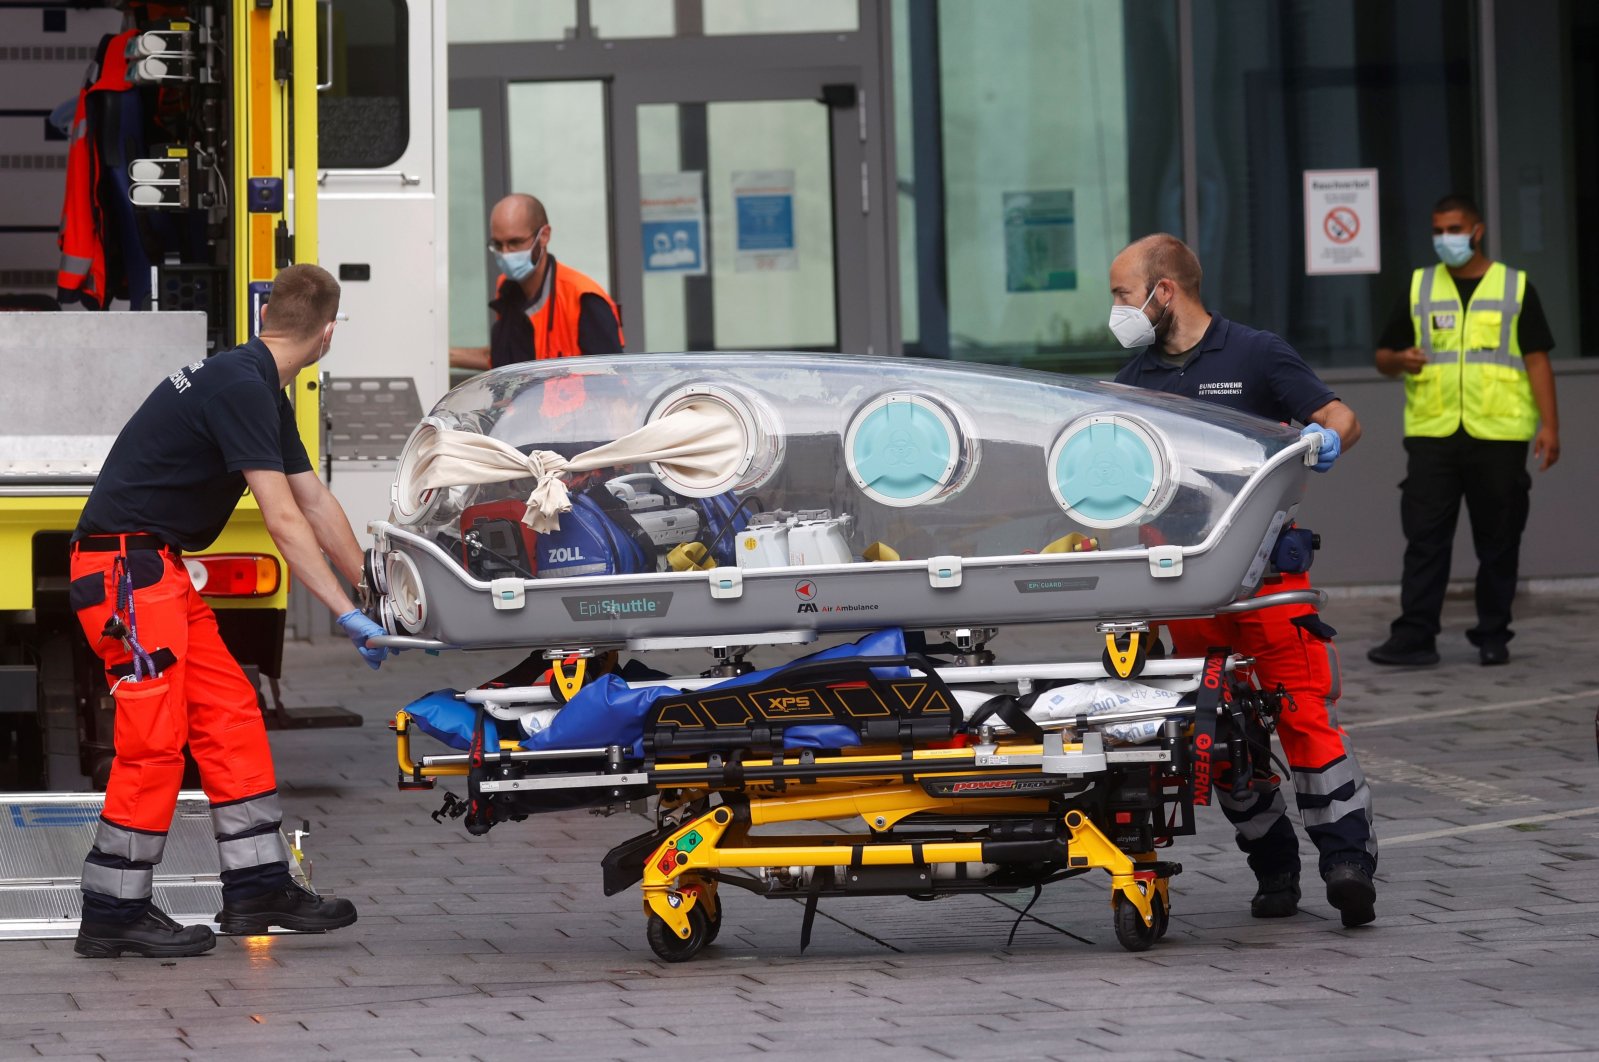 German army emergency personnel load into their ambulance the stretcher that was used to transport Russian opposition figure Alexei Navalny at Berlin's Charite hospital, where Navalny is being following a suspected poisoning, Germany, Aug. 22, 2020. (AFP Photo)